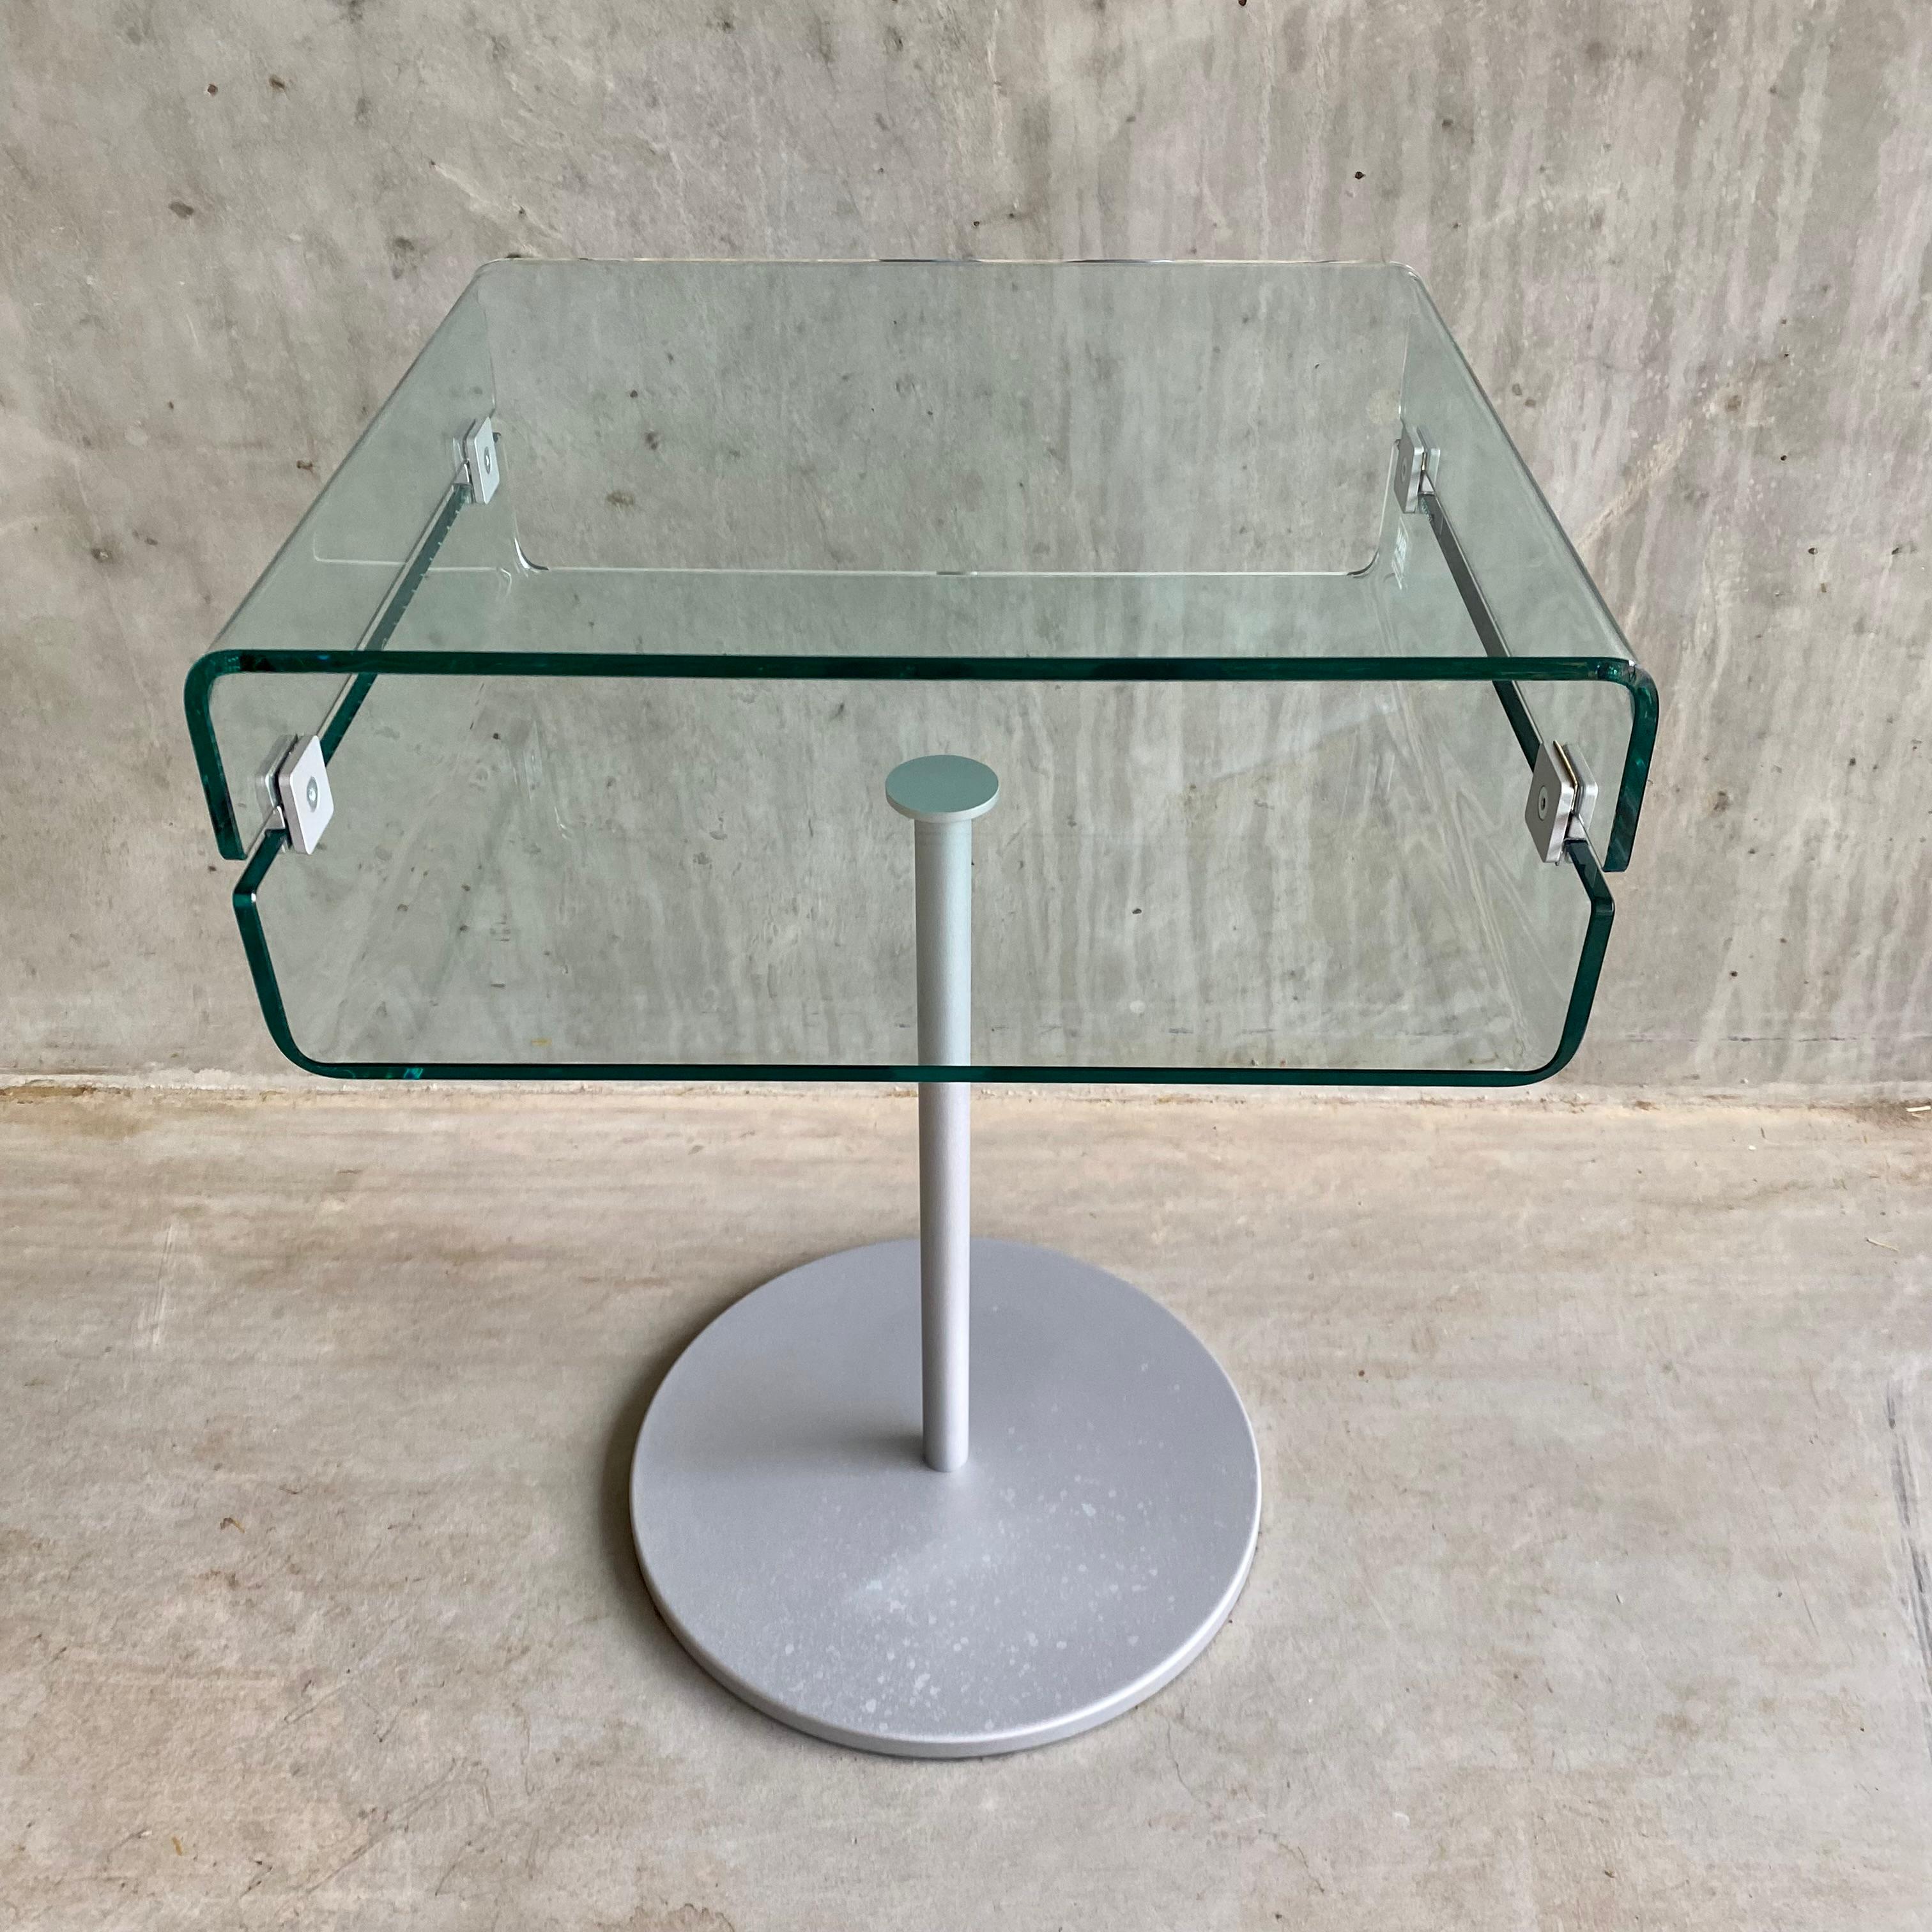 C&C Night Table or Side Table by Christophe Pillet for Fiam Italia 2